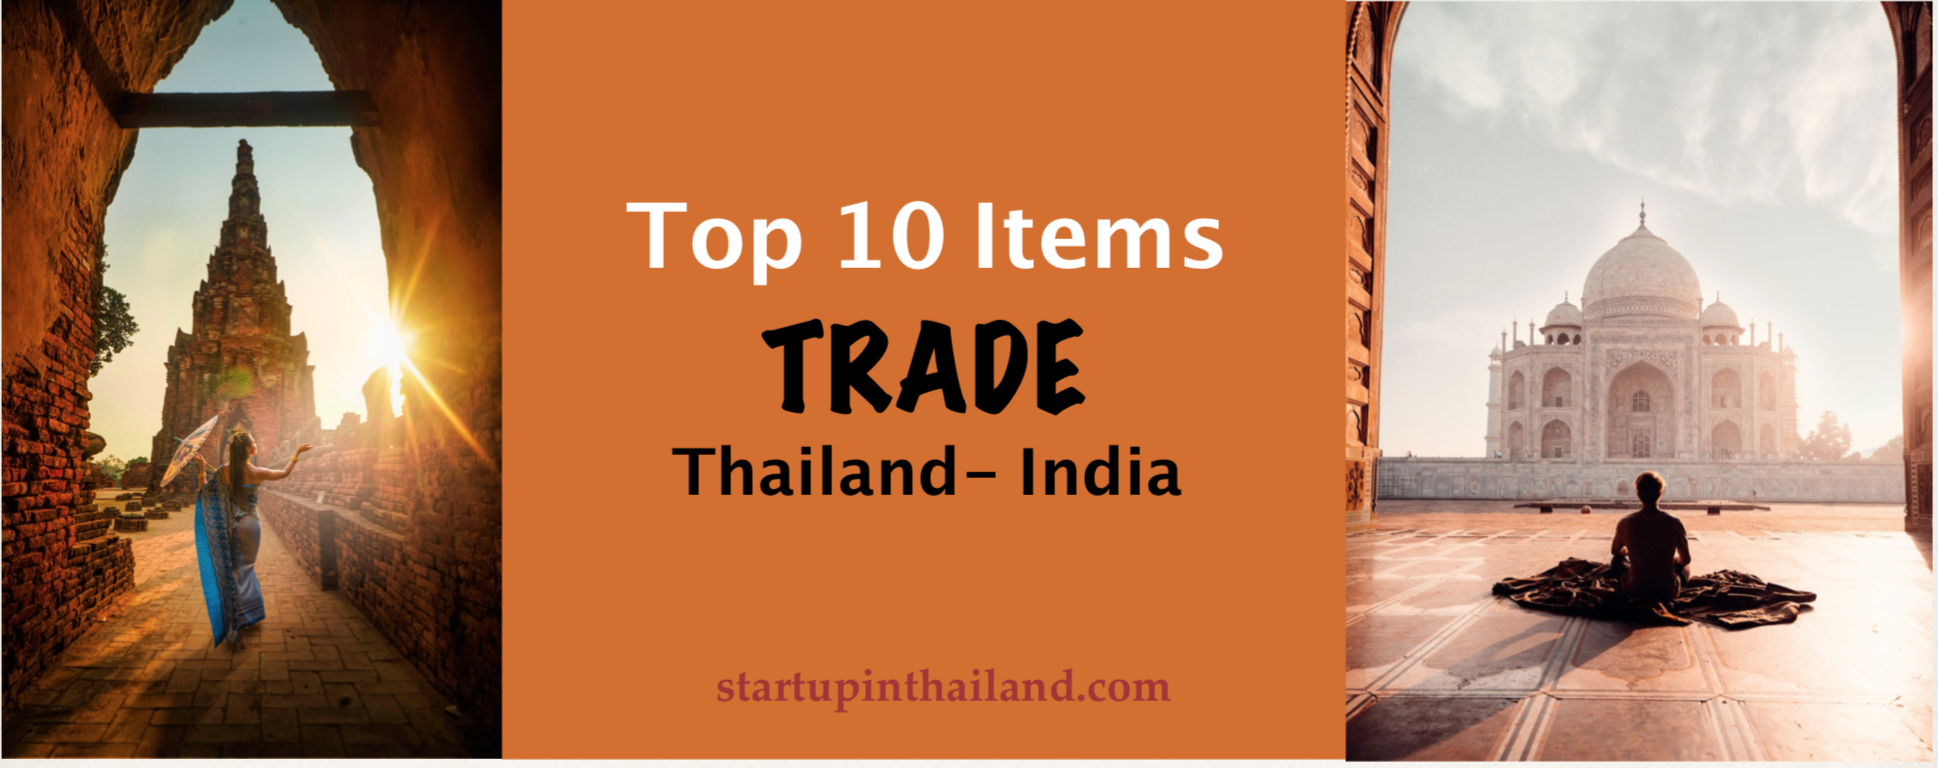 You are currently viewing Top 10 Items Traded between Thailand and India